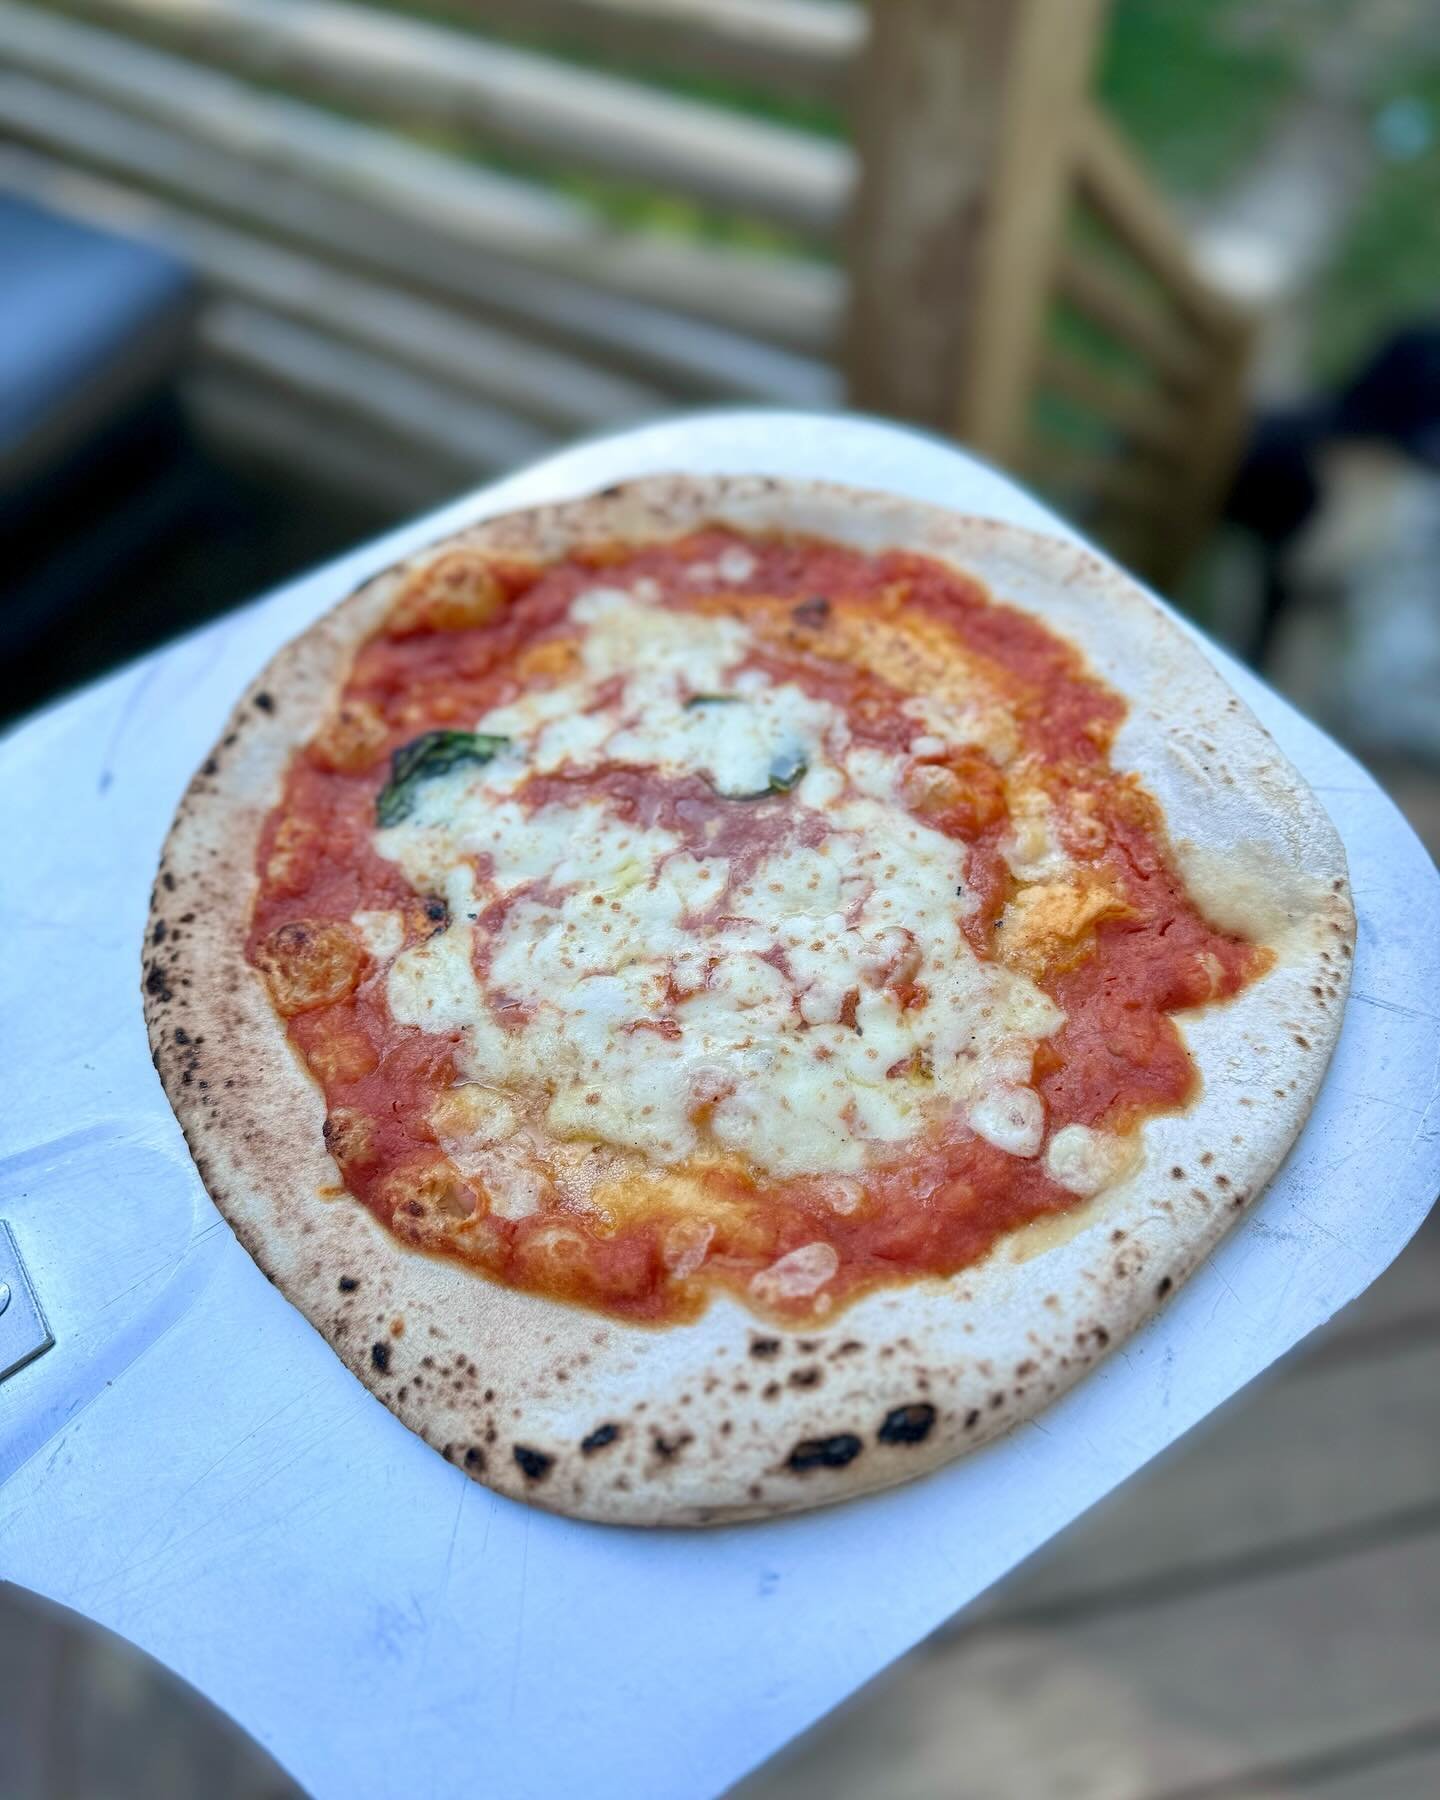 Introducing&hellip;

Talia di Napoli! This is authentic, hand made pizza straight from Naples, Italy! Talia uses only the freshest ingredients found in Italy with no preservatives or additives. Don&rsquo;t walk, run to get your pizza now!